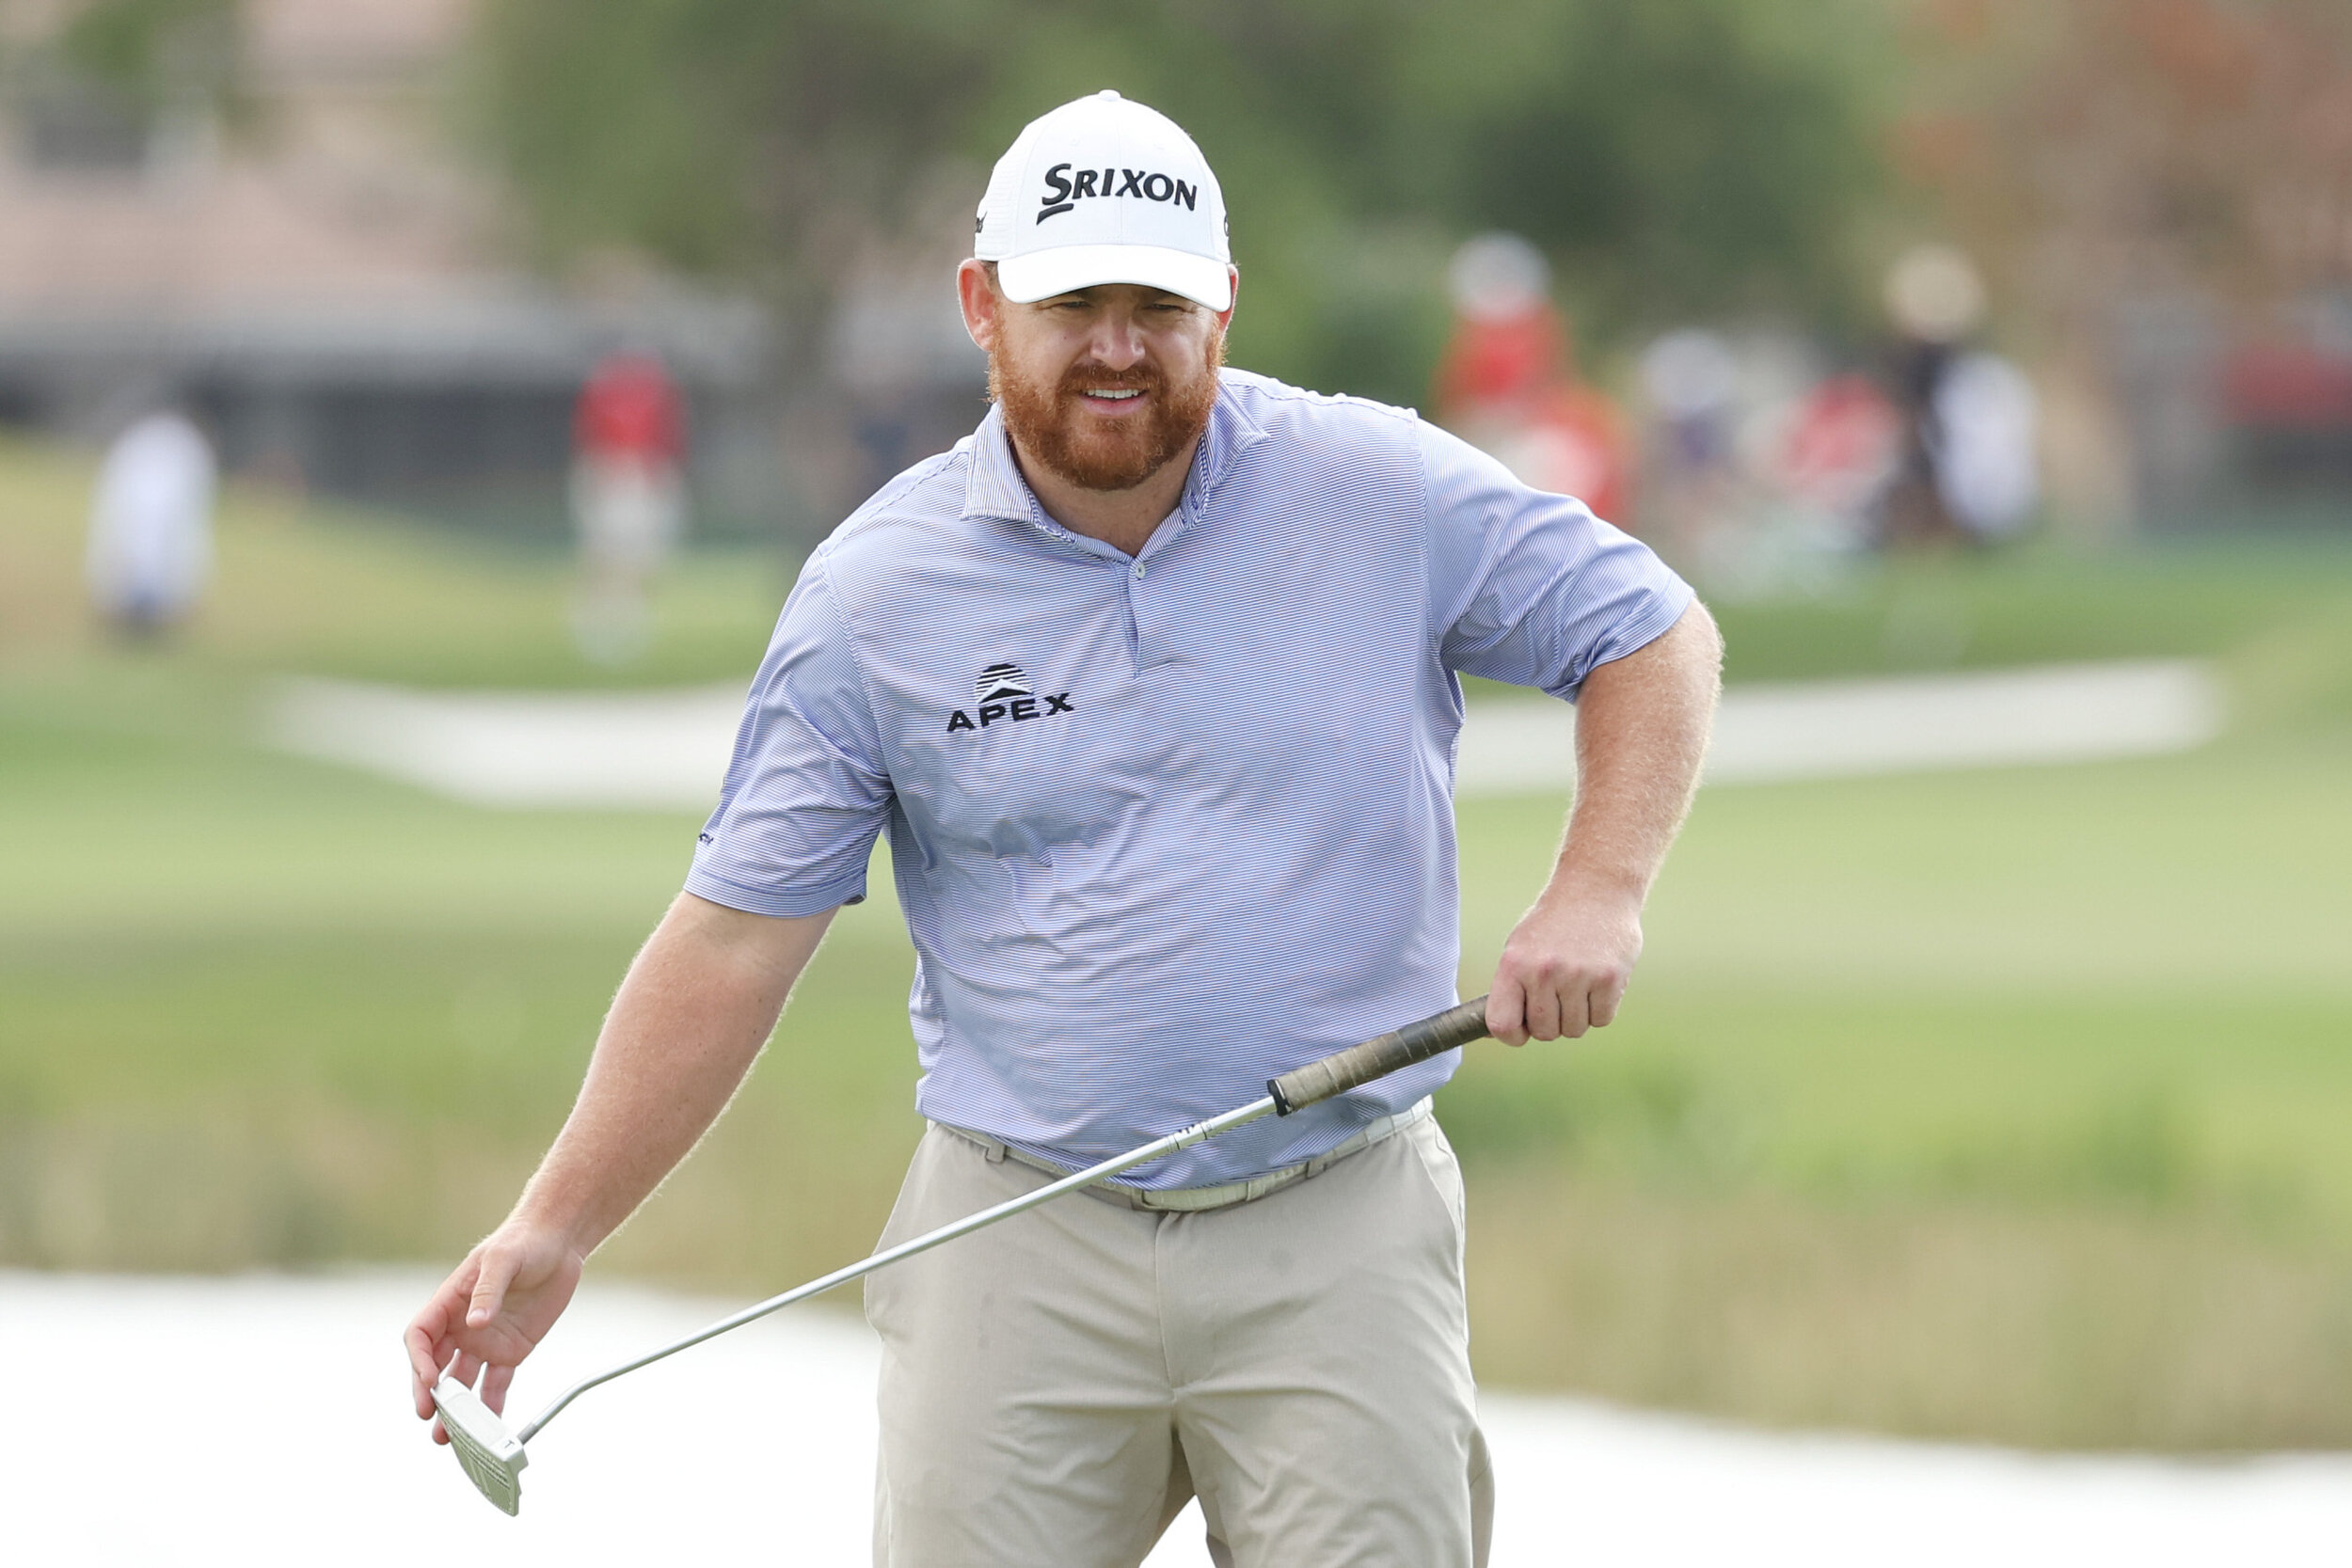  PALM BEACH GARDENS, FLORIDA - MARCH 20: J.B. Holmes of the United States prepares to putt on the 16th green during the third round of The Honda Classic at PGA National Champion course on March 20, 2021 in Palm Beach Gardens, Florida. (Photo by Cliff